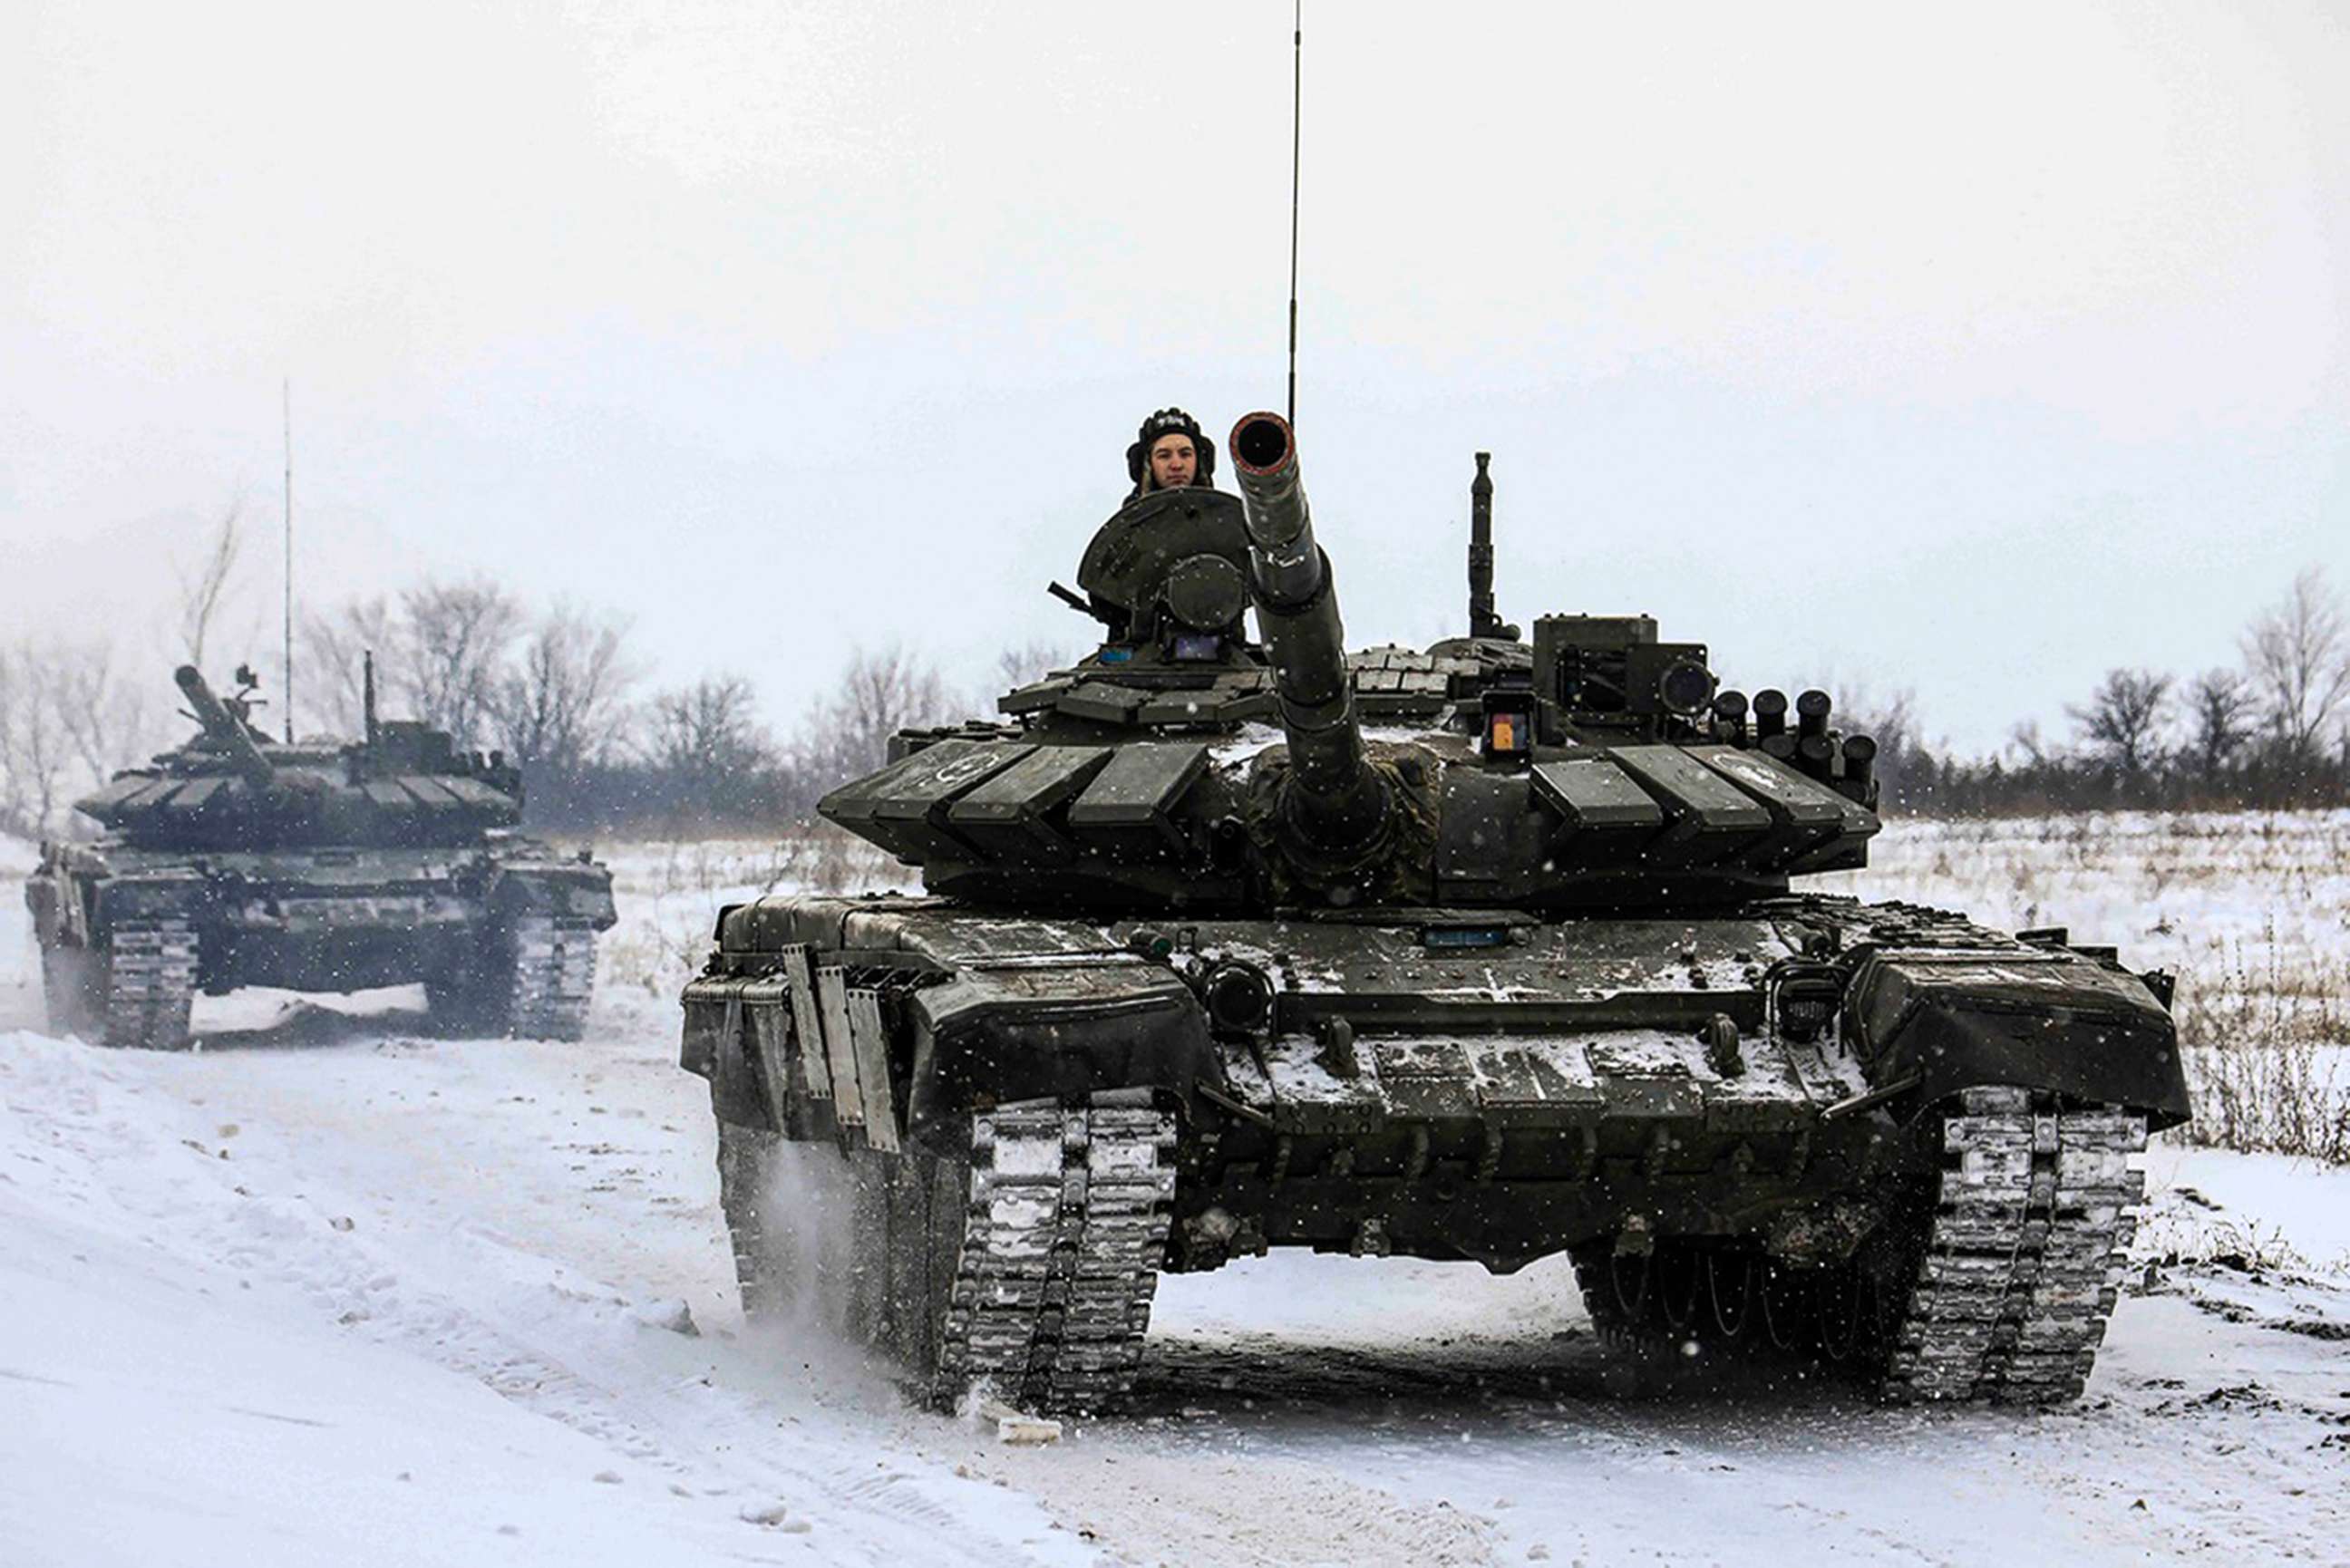 FILE PHOTO: In this photo provided by the Russian Defense Ministry Press Service on Feb. 14, 2022, Russian tanks roll on a field during military drills in Russia's Leningrad region.